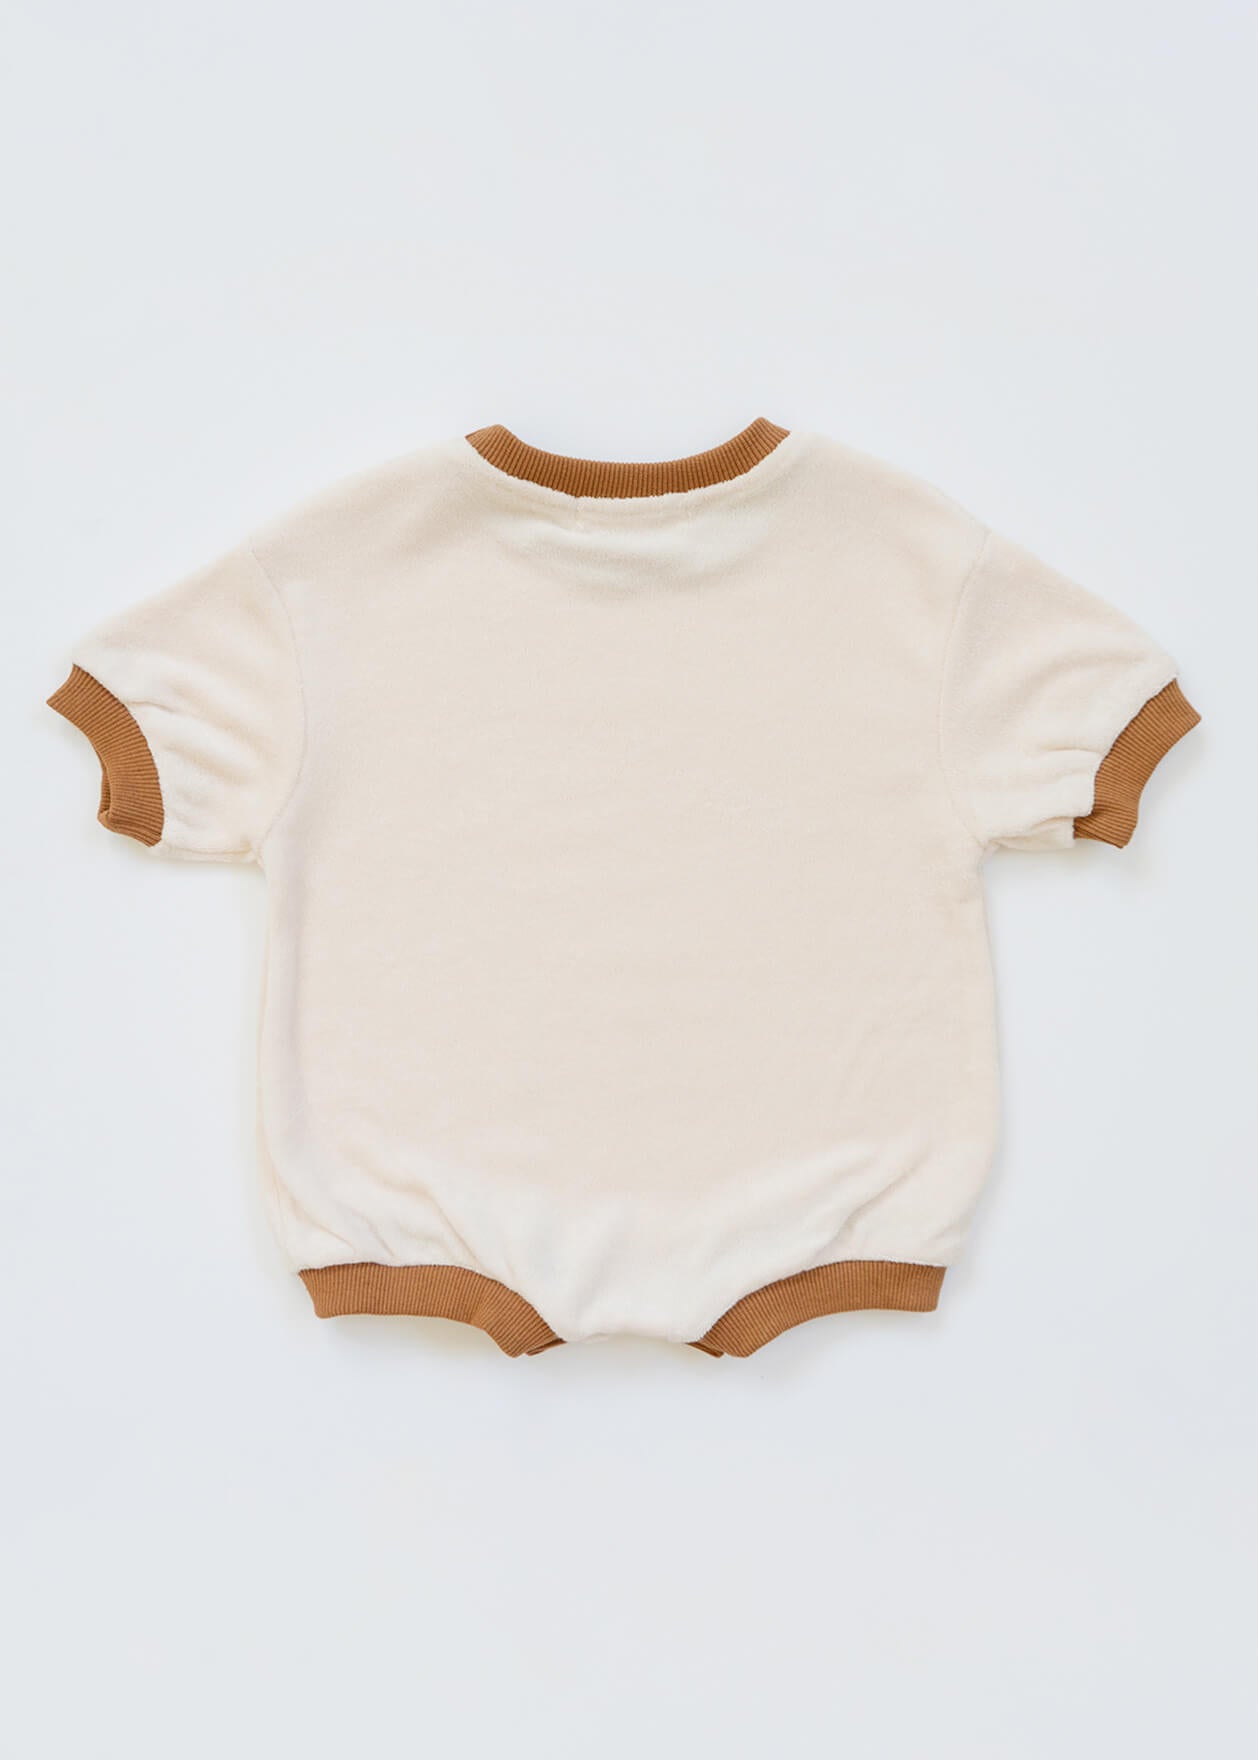 BYRON Terry Towelling Gender-Neutral Romper towel cotton neutral brown beige gender neutral boys girls summer soft oversized fashion style toddler baby newborn